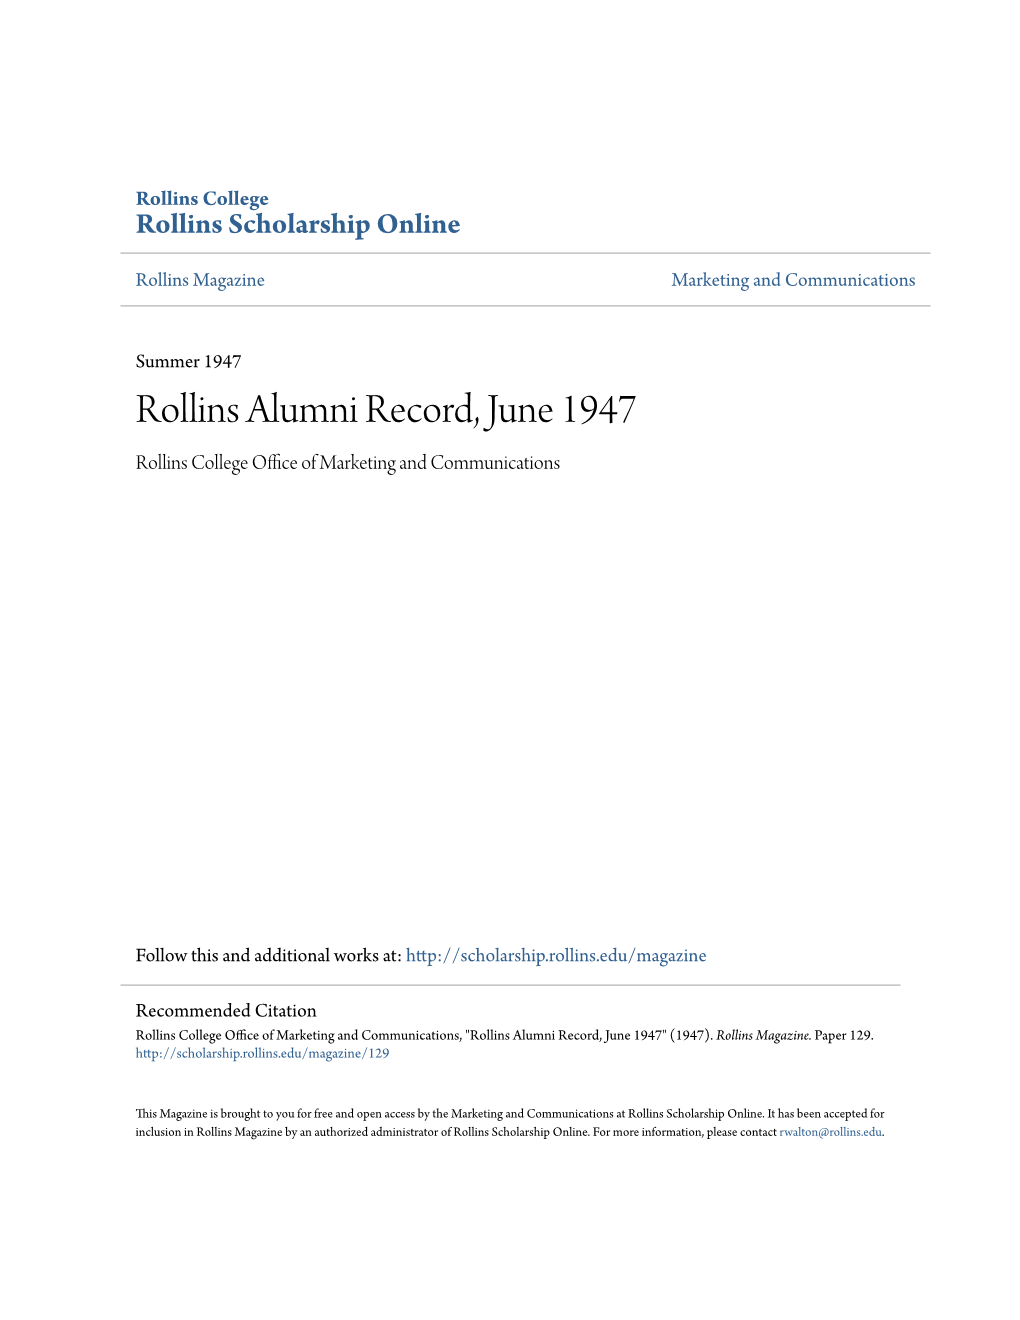 Rollins Alumni Record, June 1947 Rollins College Office Ofa M Rketing and Communications